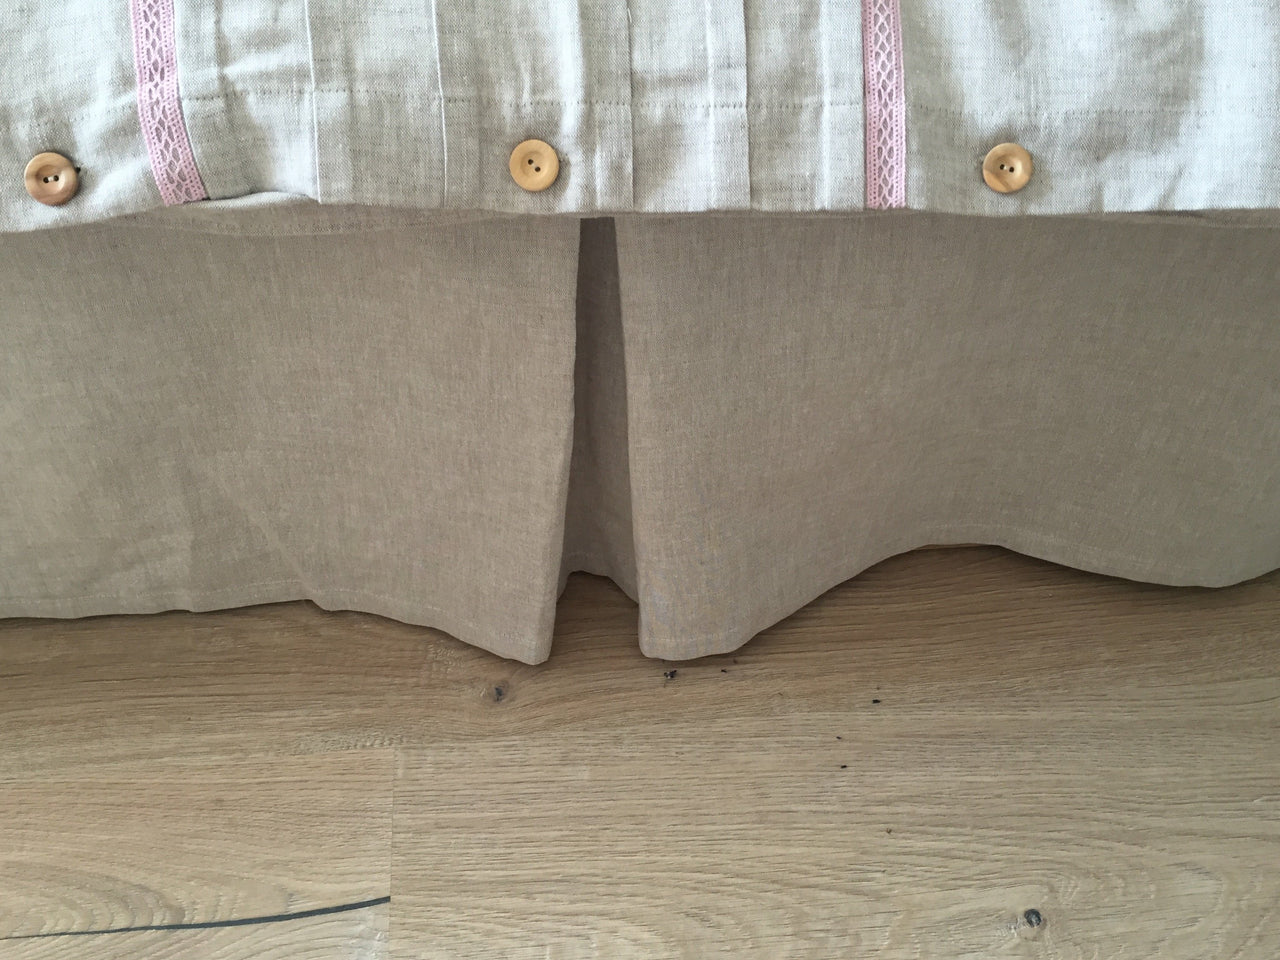 Linen Bed Valance with Cotton 